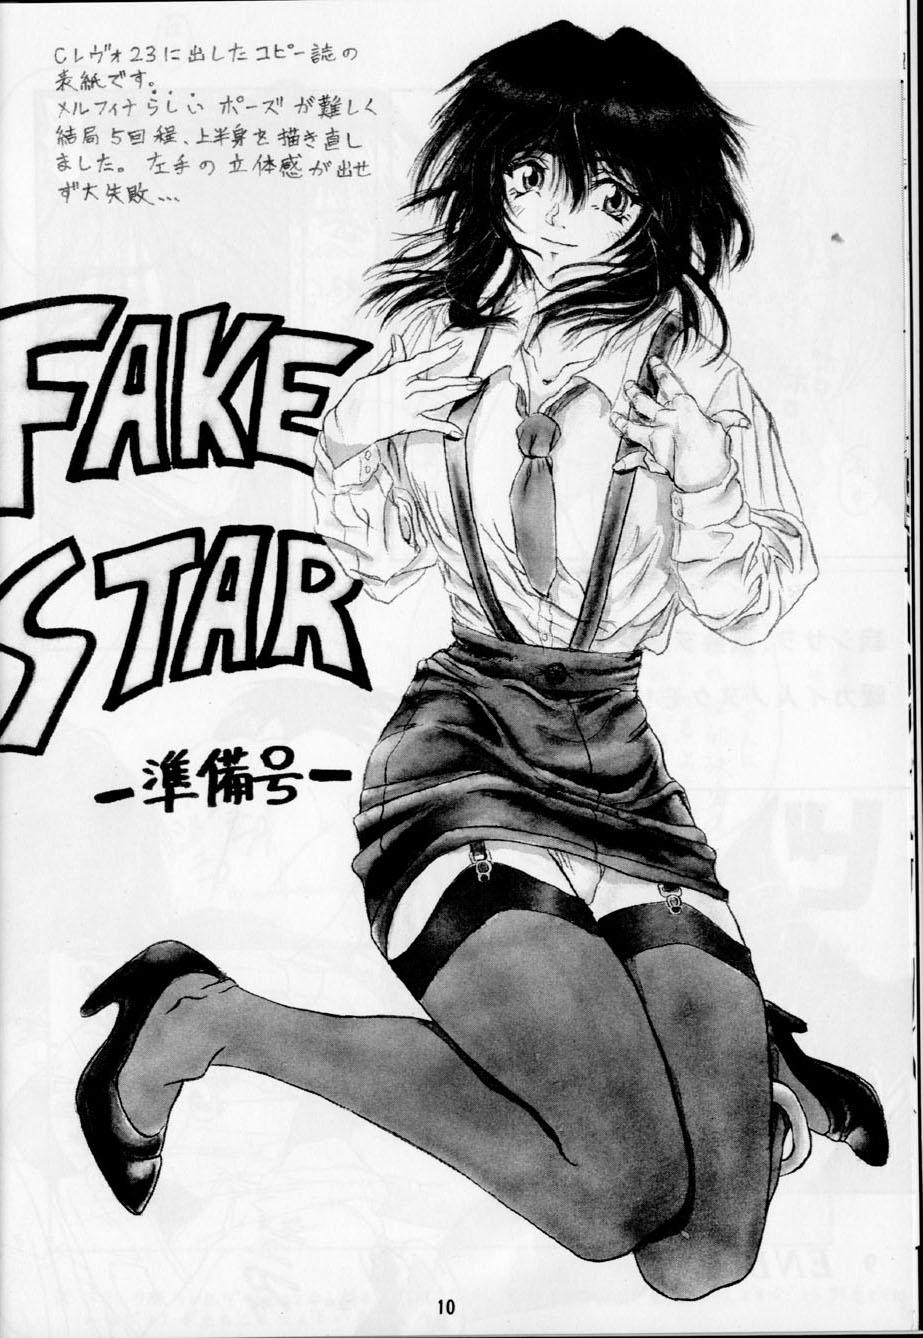 Tanned Fake Star - Outlaw star T Girl - Page 9